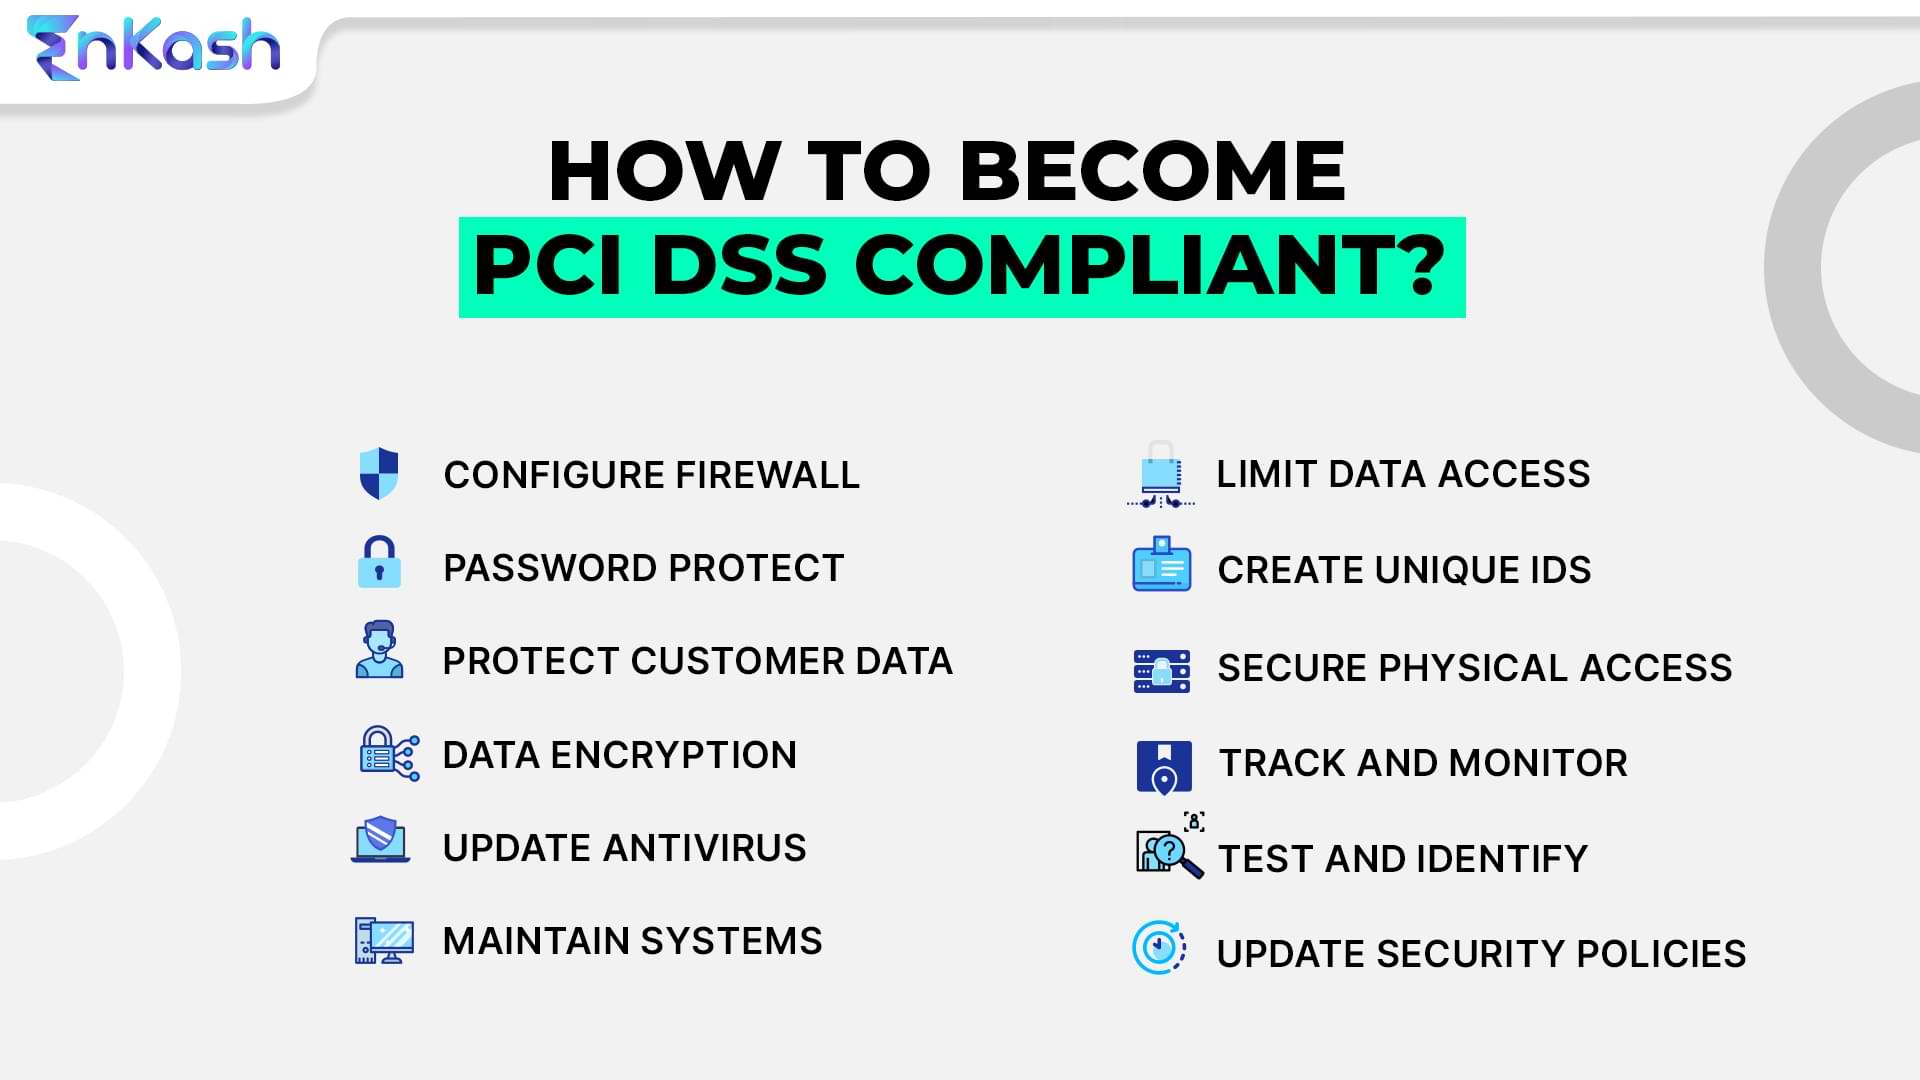 How to become PCI DSS Compliant